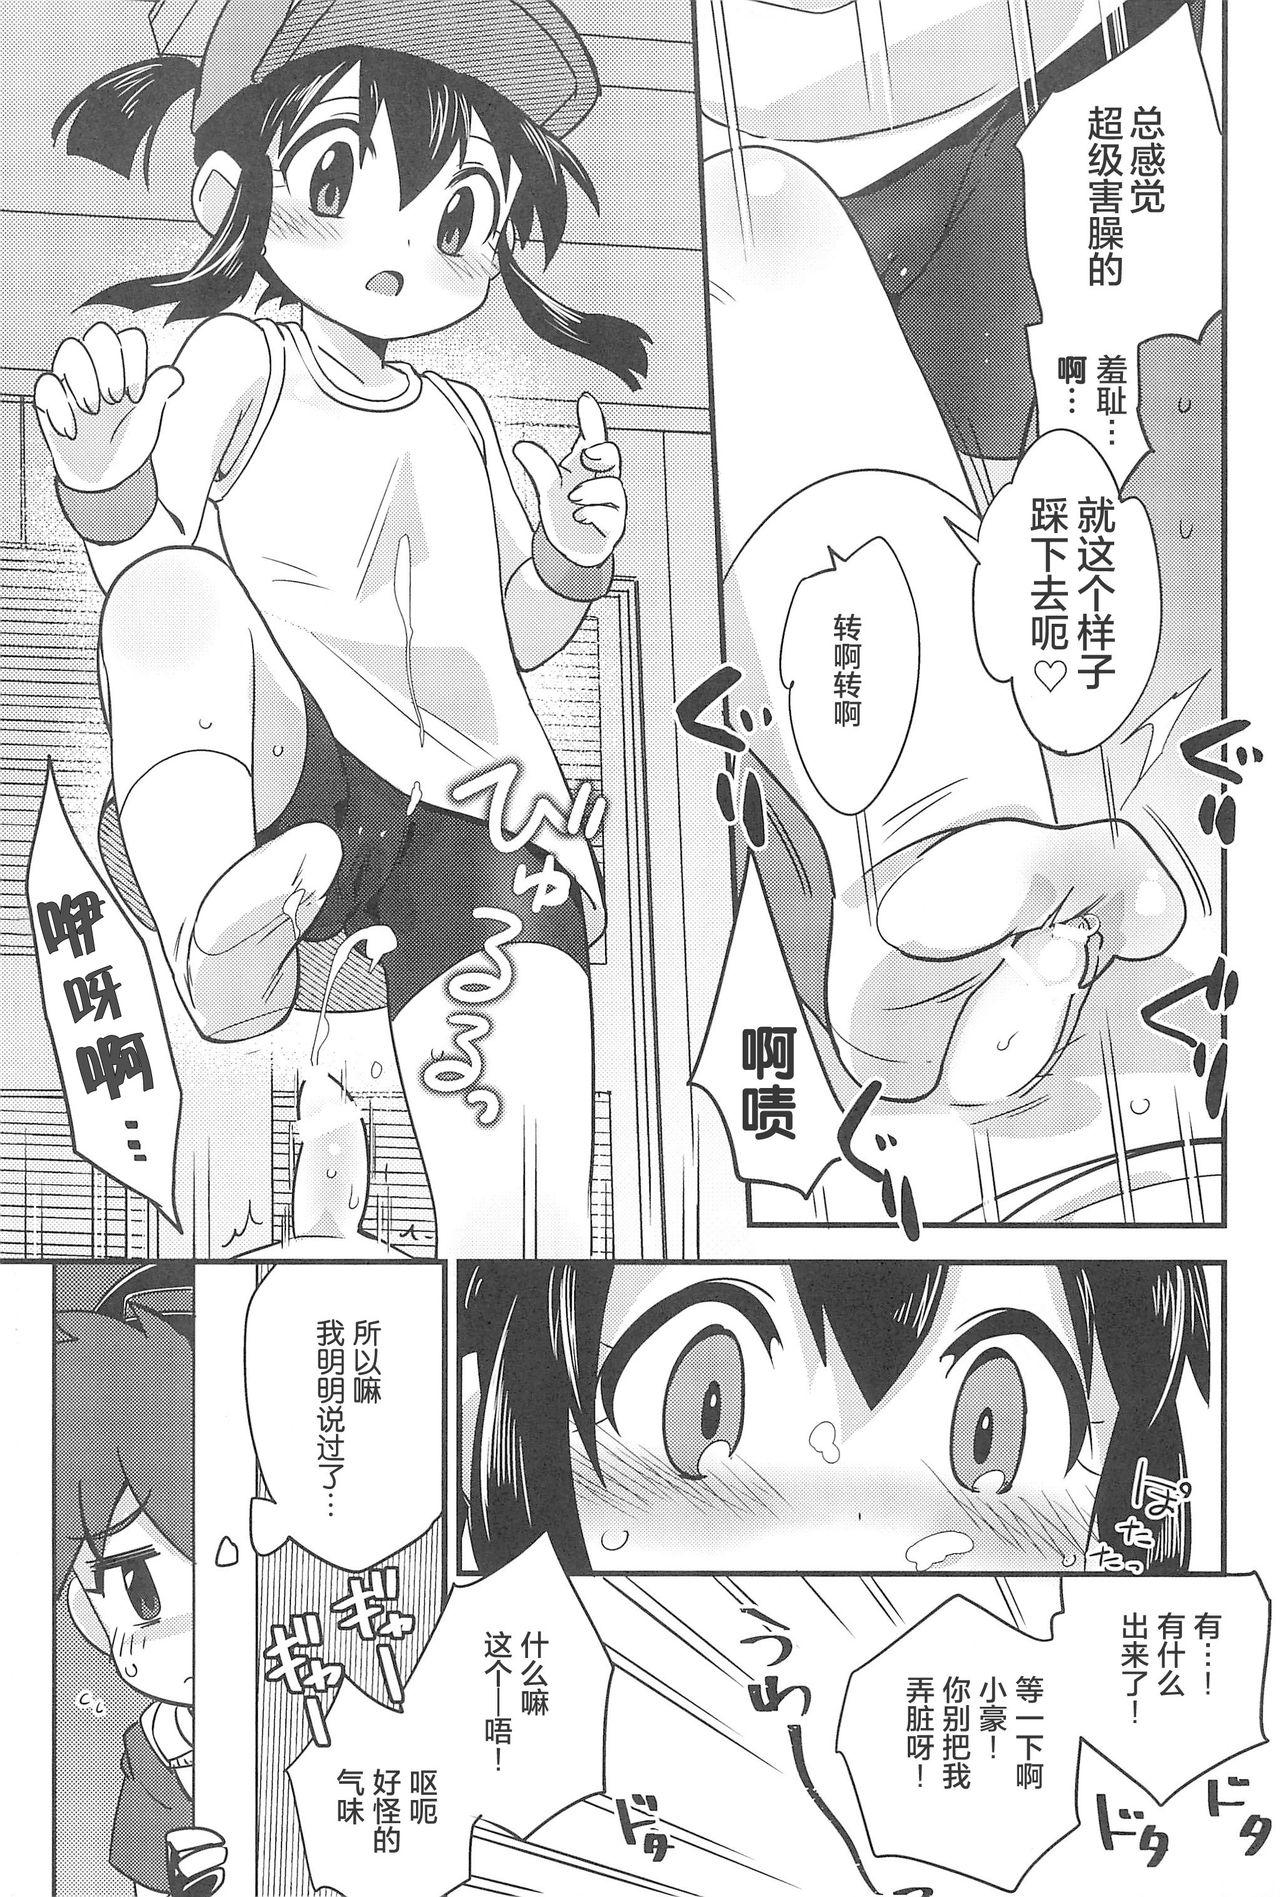 Indonesian Denki no Chikaratte Sugee! - Bakusou kyoudai lets and go Casting - Page 11